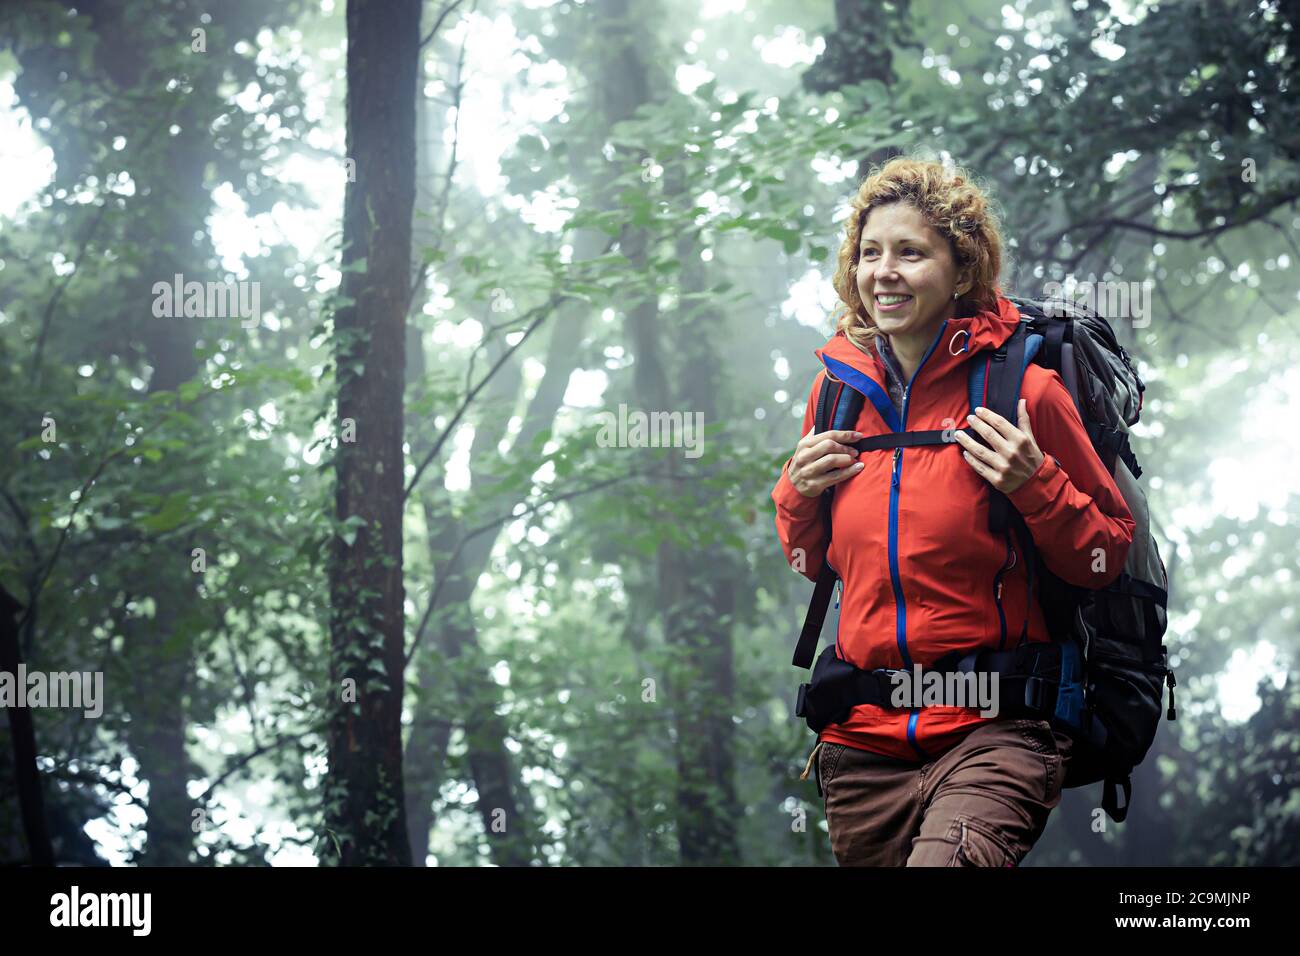 Hot girls backpacking Girl Backpacker High Resolution Stock Photography And Images Alamy